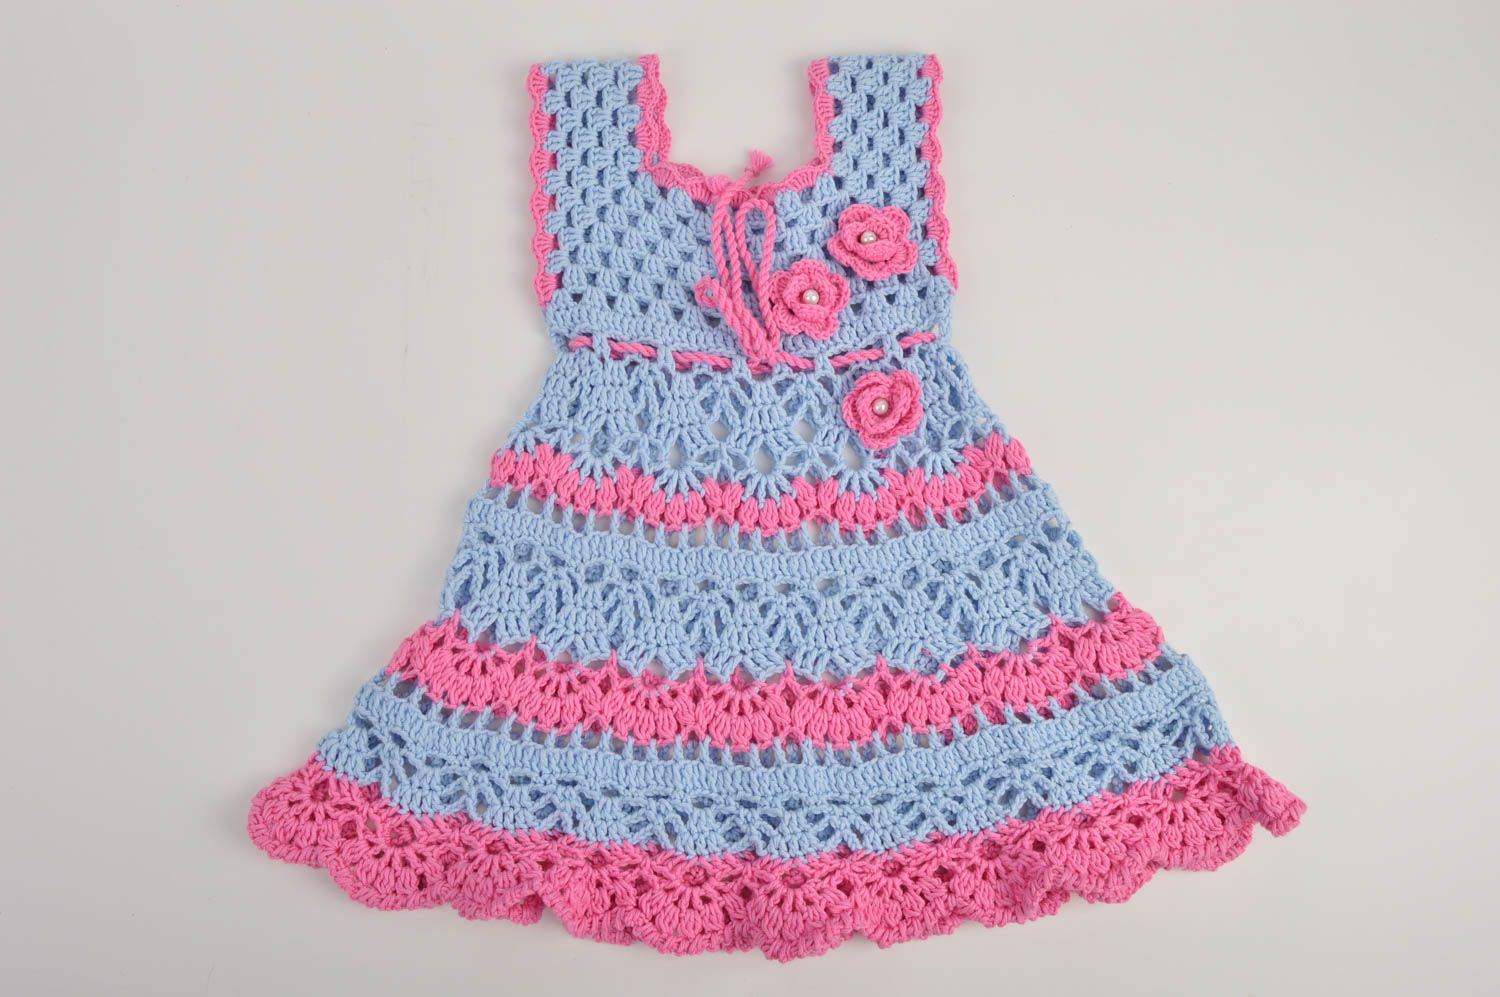 Unusual handmade crochet dress cute baby outfits designer clothes for kids photo 3